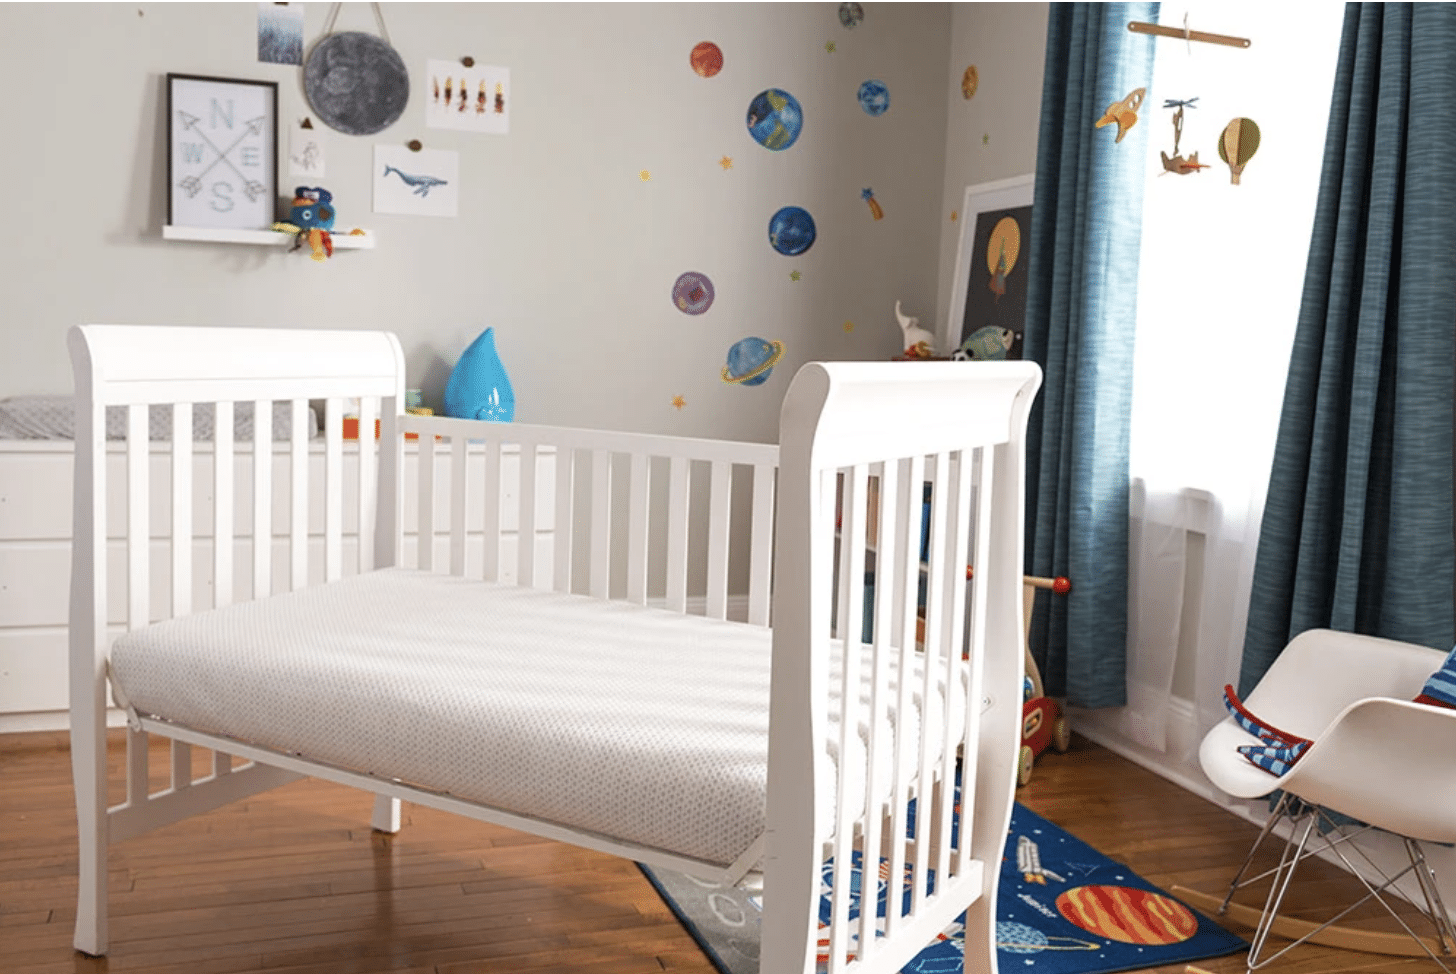 lullaby earth breeze crib mattress review